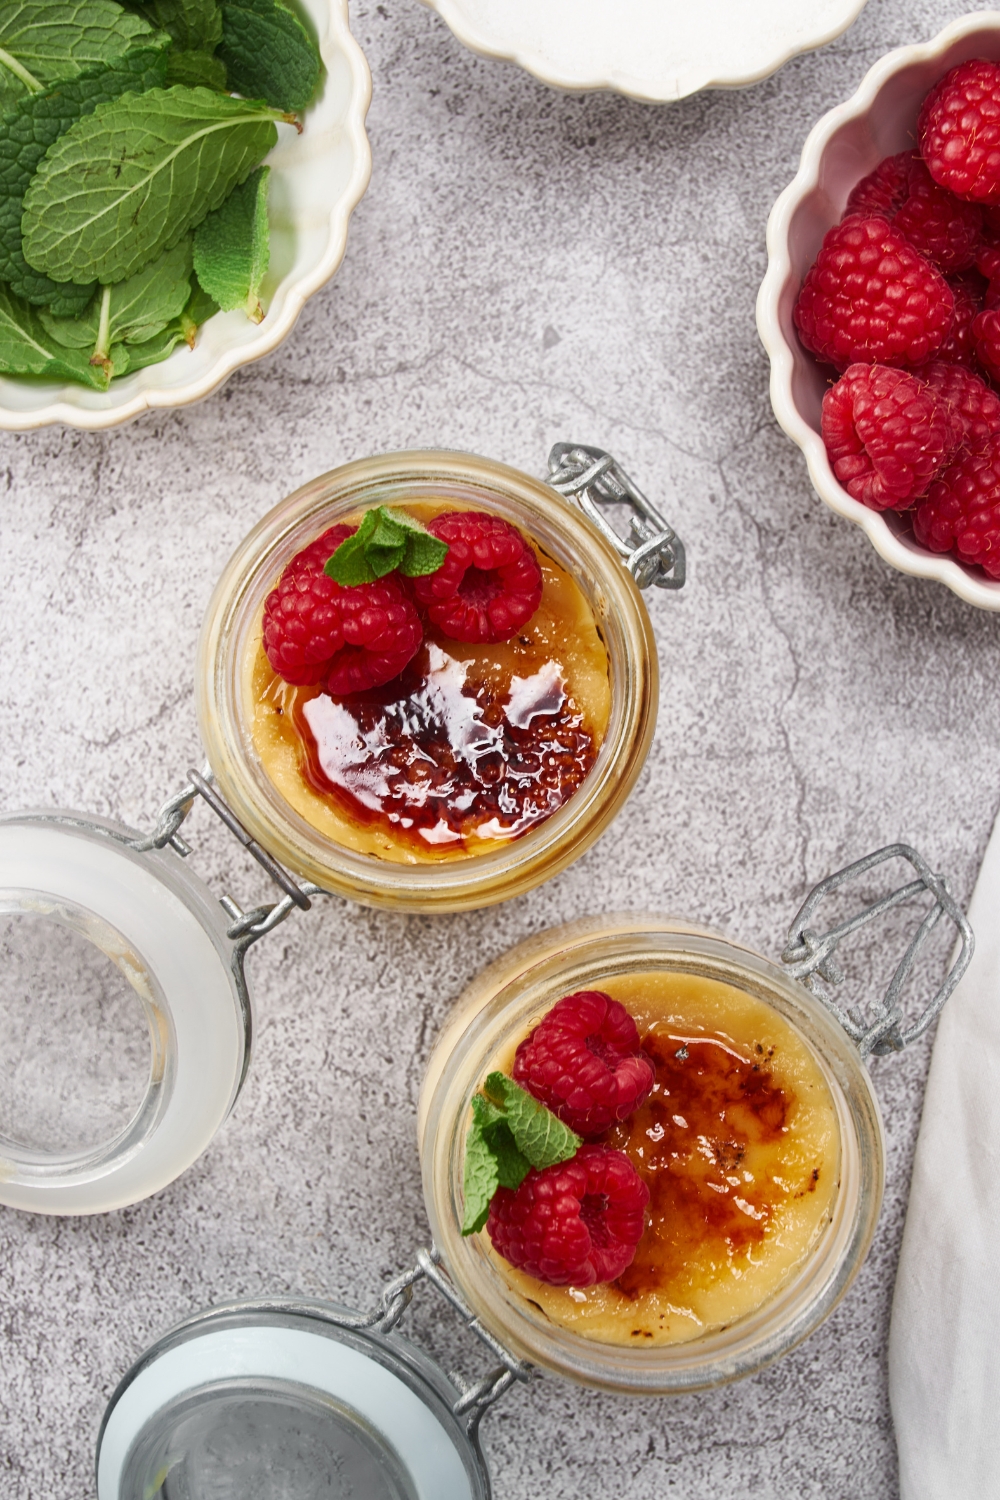 Overhead view of two creme brûlée desserts in jars, both next to bowls of fresh mint leaves and fresh raspberries.